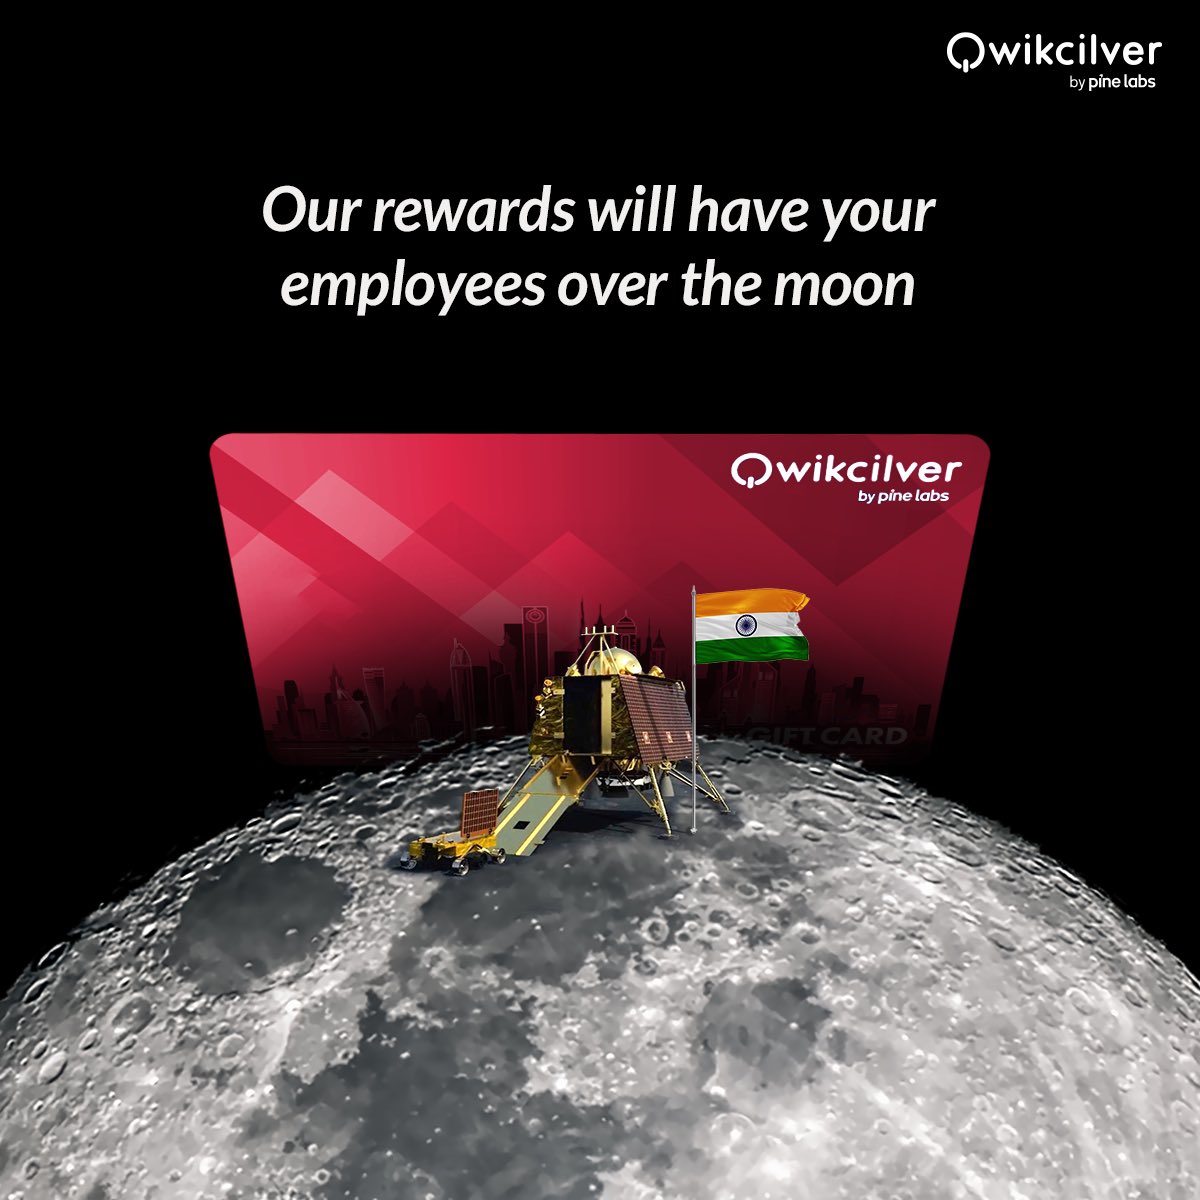 Fuel your employee’s productivity with the right rewards. Talk to us today bit.ly/3MXW00q 

#Chandrayaan3Landing #Chandrayaan3Success #chanderyaan3 #digitalgiftcards #employeerewards #giftcards #qwikcilver